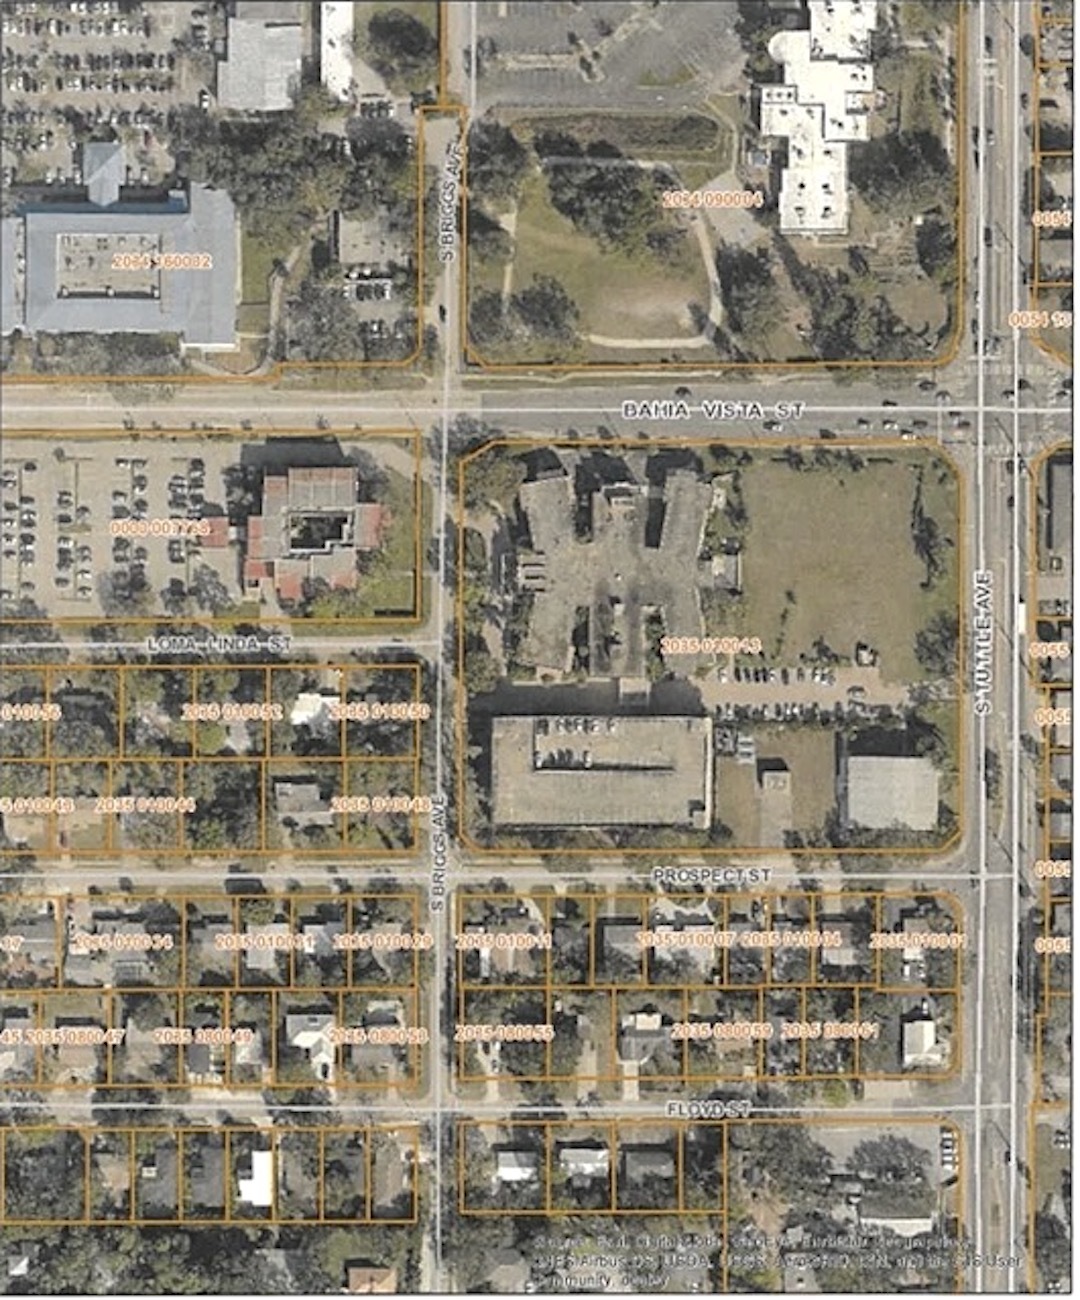 The proposed site of Bahia Vista Apartments is at the corner of southwest corner of Bahia Vista Road and South Tuttle Avenue. The existing parking garage is in the southwest corner of the parcel. (Courtesy)